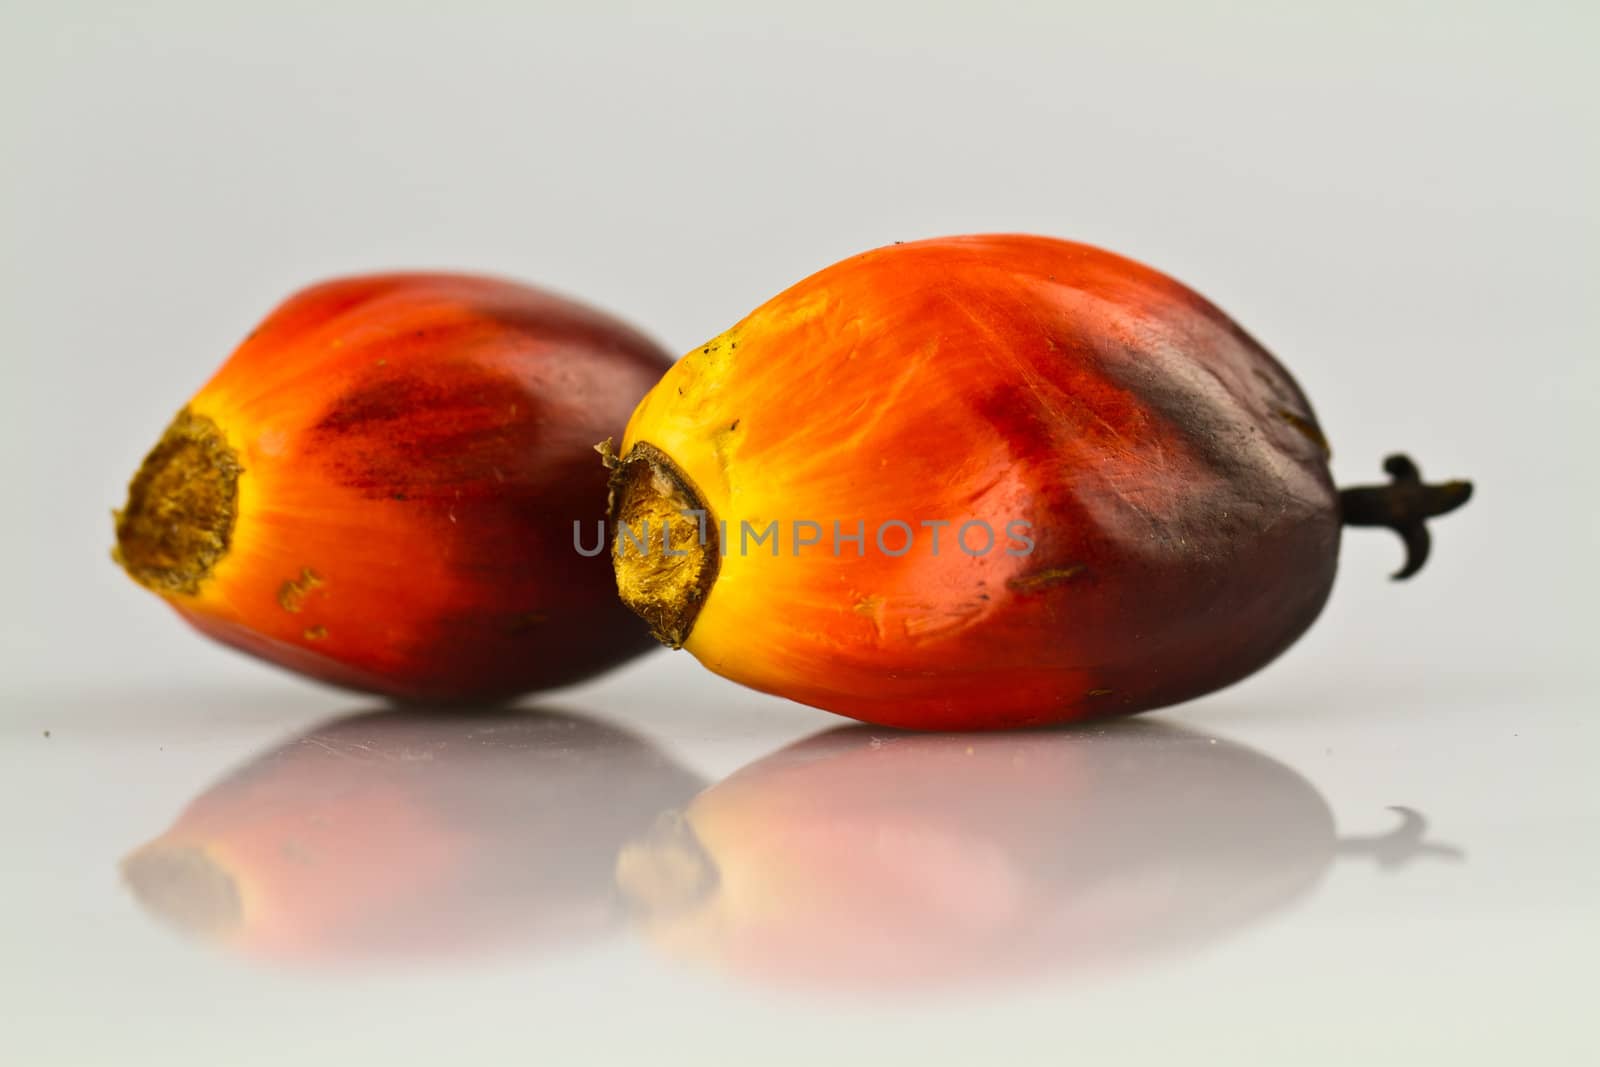 two oil palm seed on a reflecting white surface